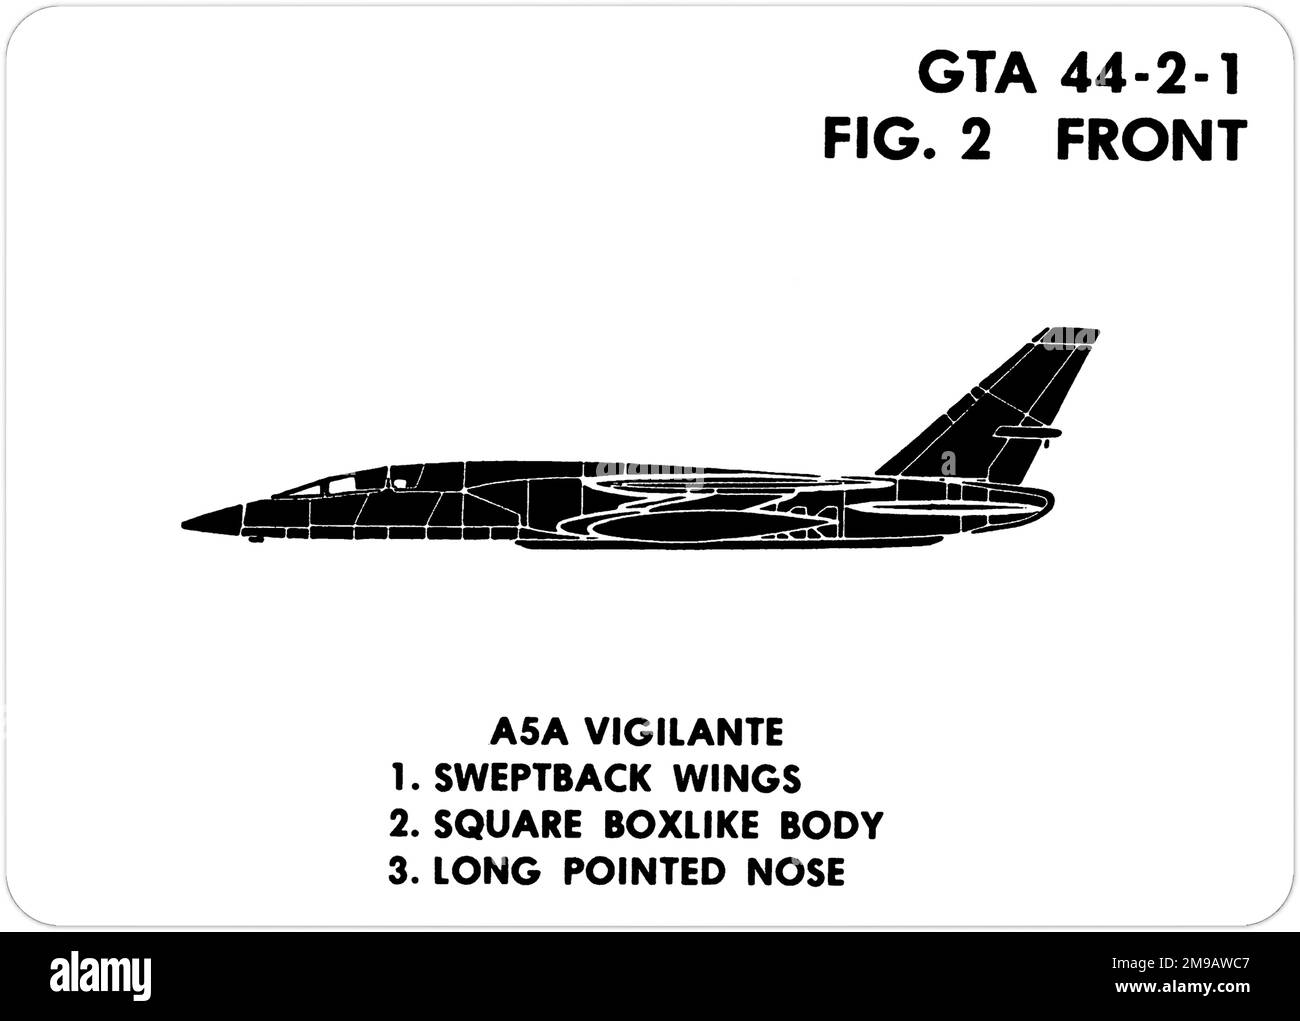 North American RA-5C Vigilante profile. This is one of the series of Graphics Training Aids (GTA) used by the United States Army to train their personnel to recognize friendly and hostile aircraft. This particular set, GTA 44-2-1, was issued in July1977. The set features aircraft from: Canada, Italy, United Kingdom, United States, and the USSR. Stock Photo